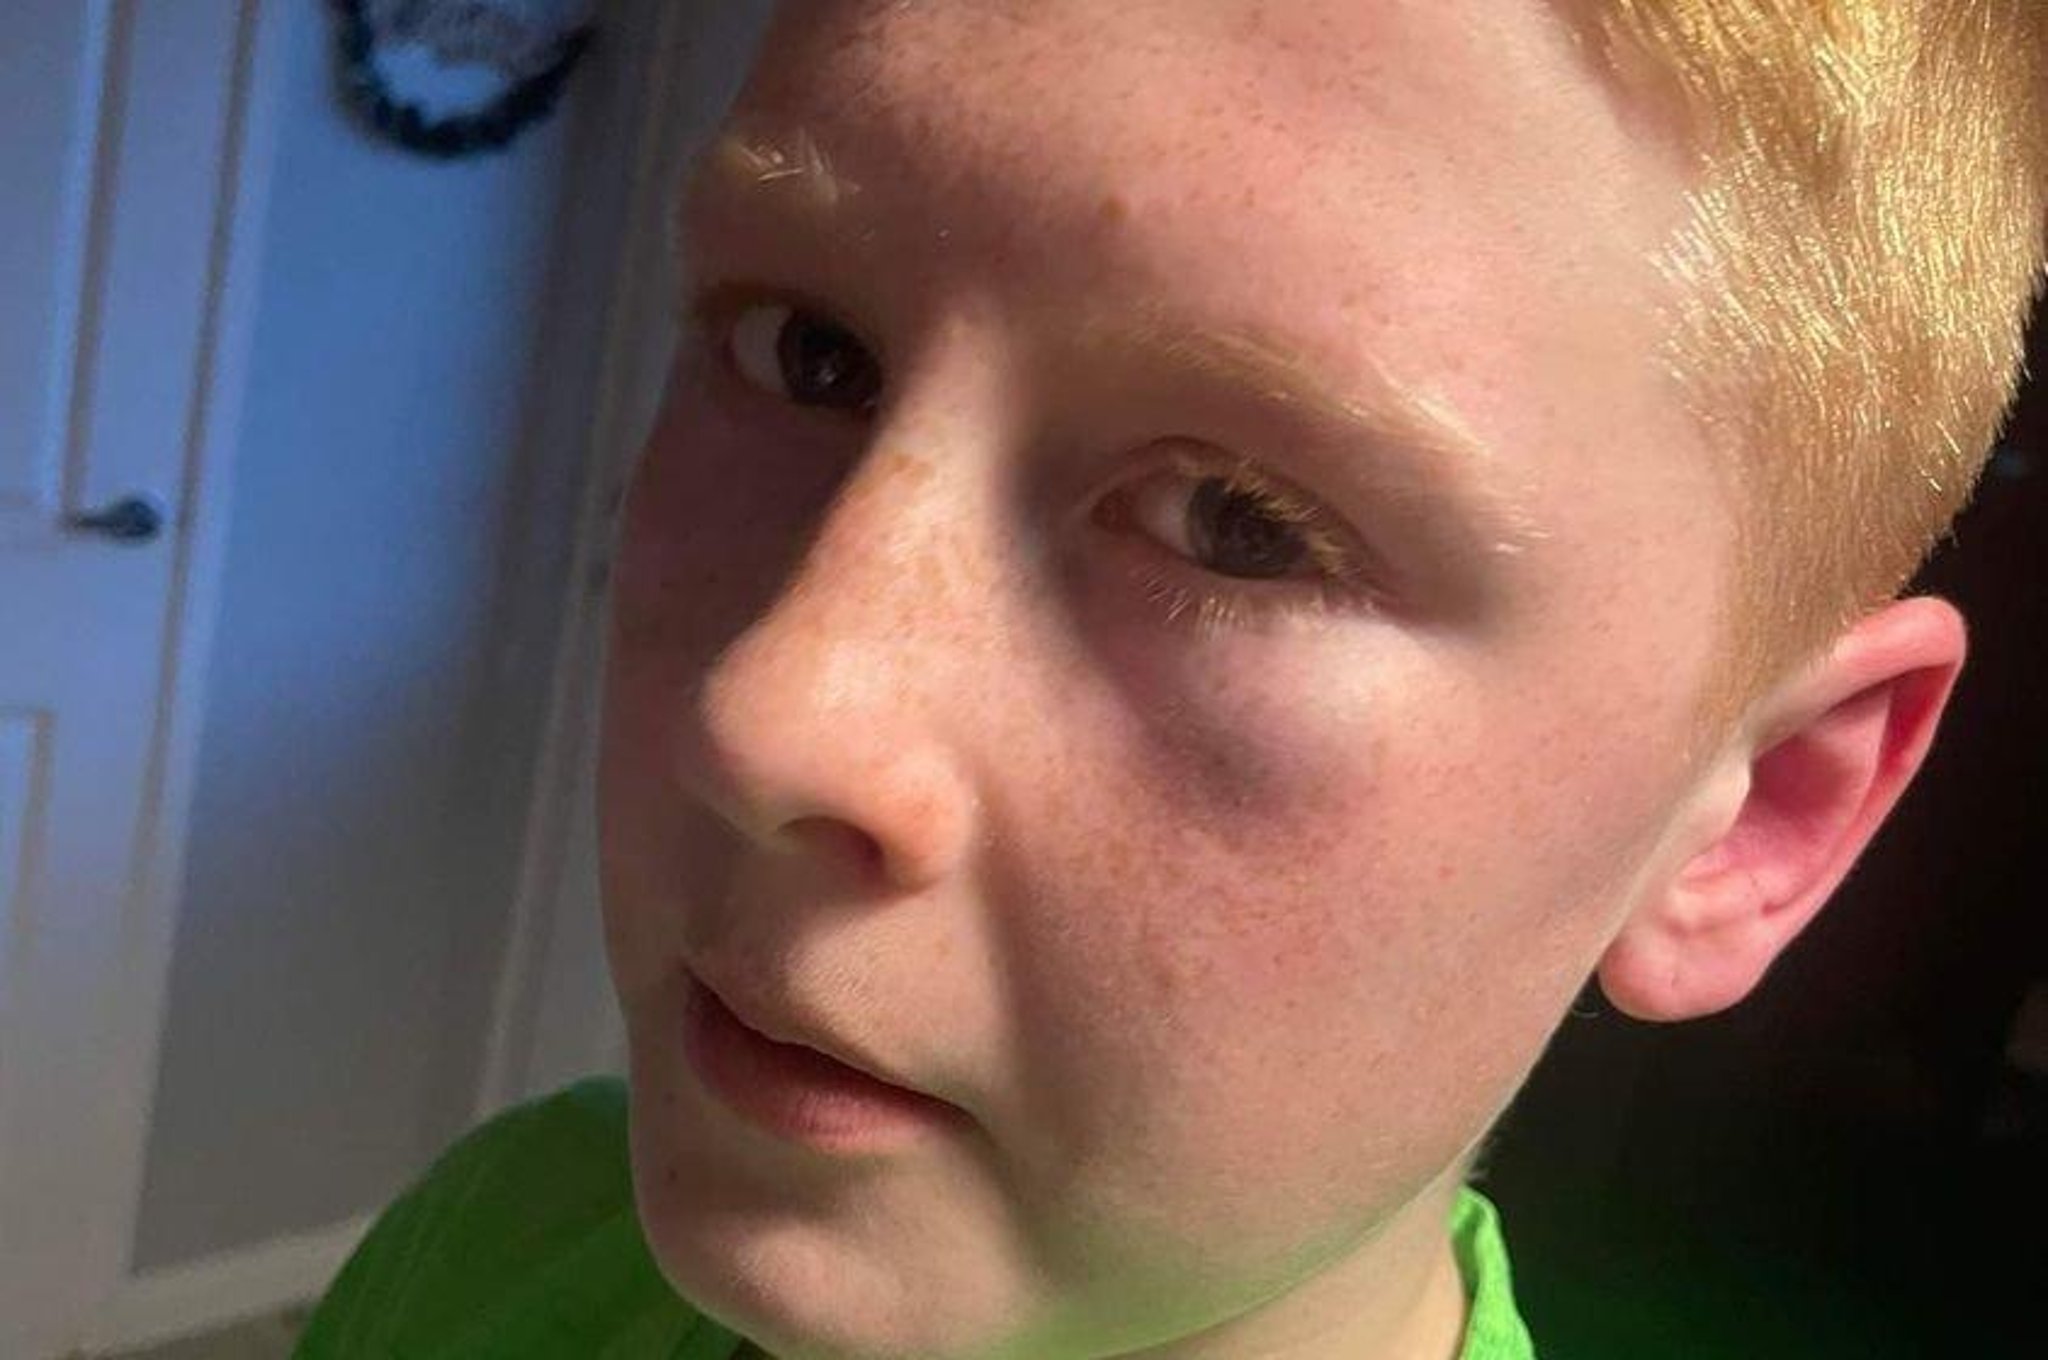 'Savage and unprovoked sectarian attack' on 13-year-old boy condemned